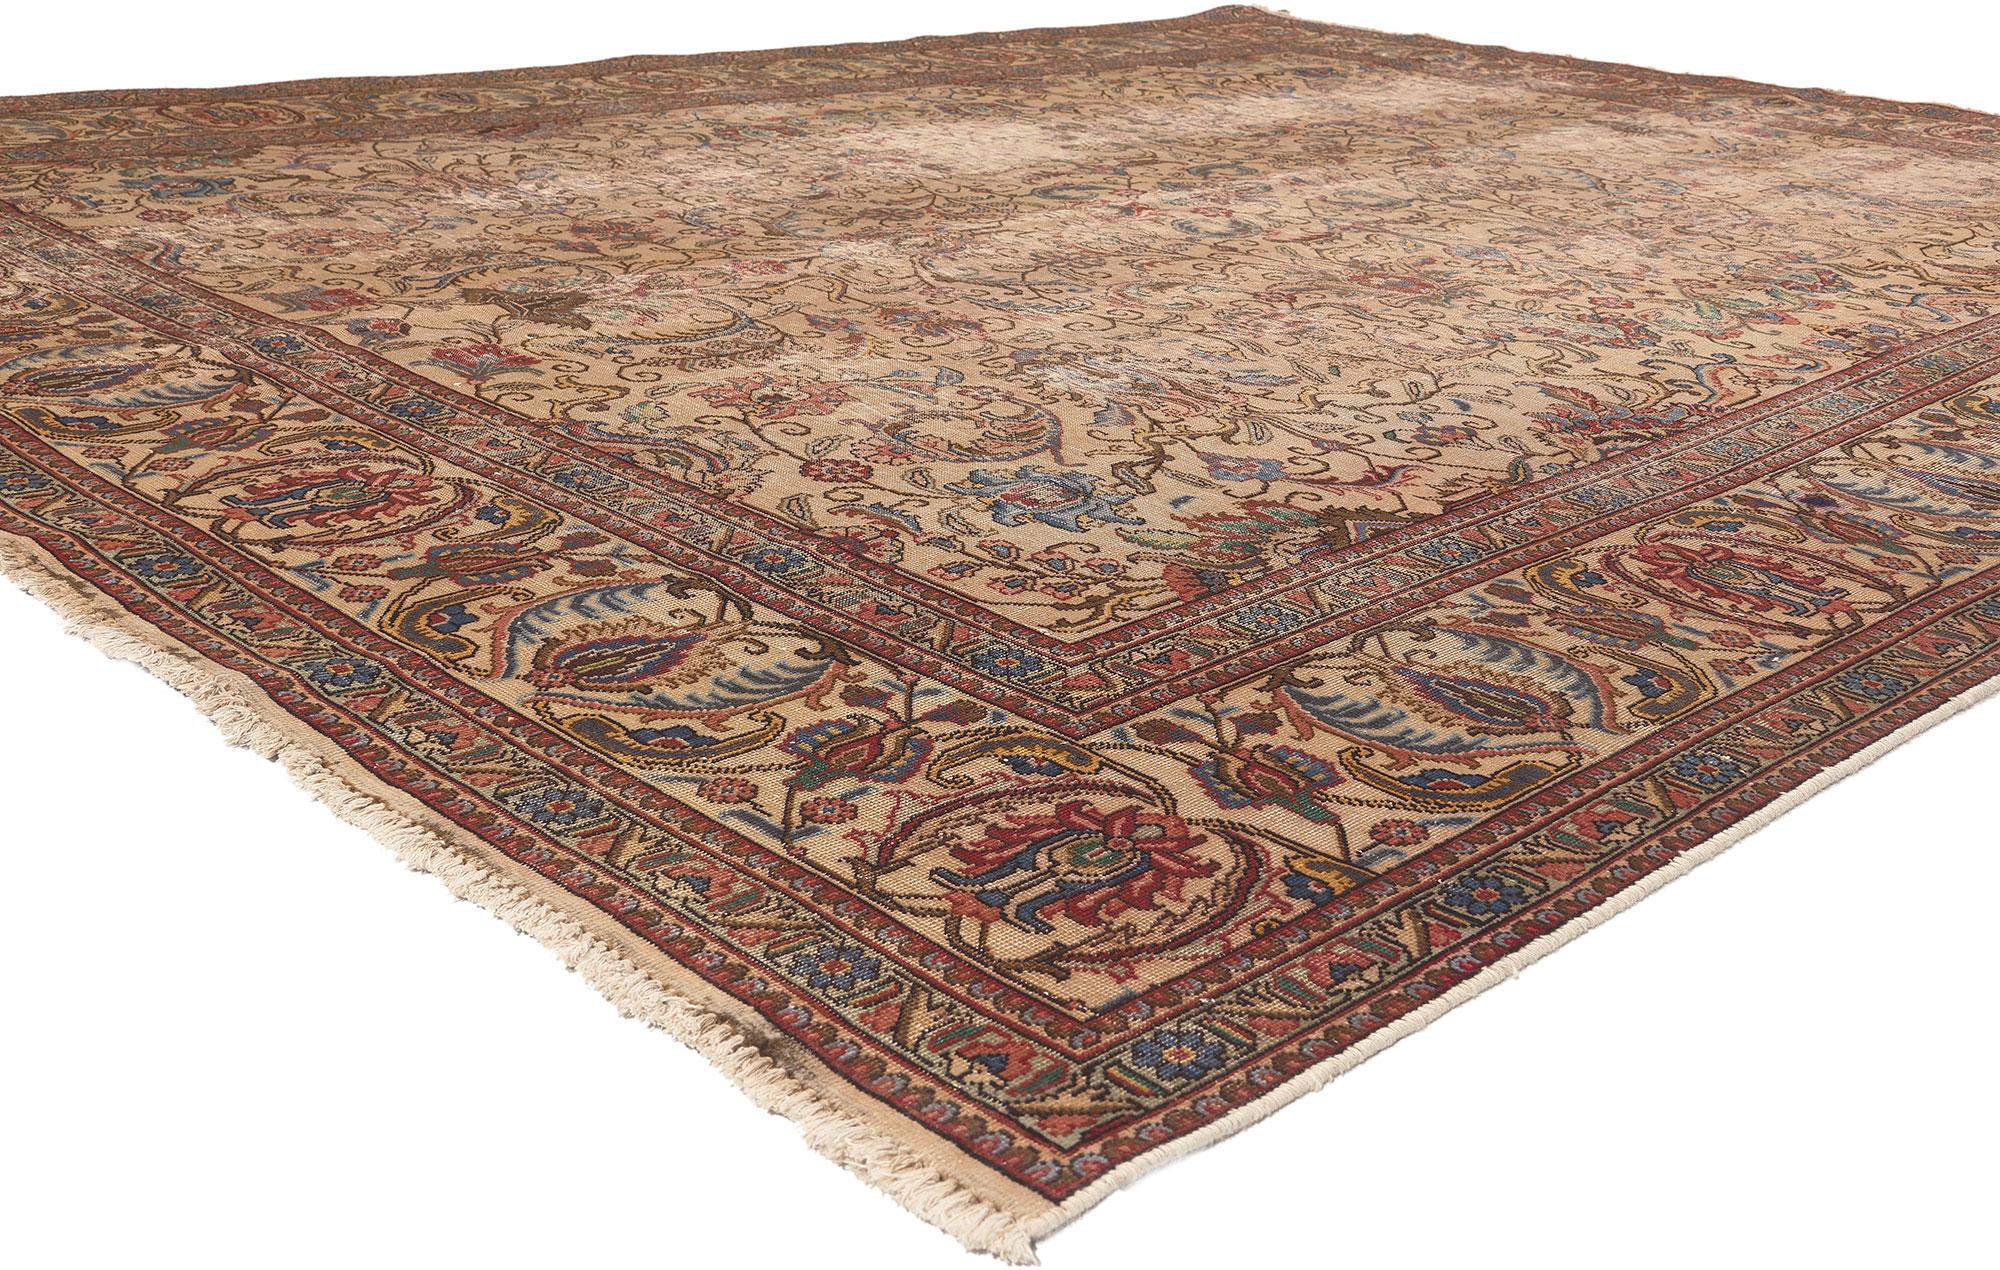 74332 Antique-Worn Persian Tabriz Rug, 09'07 x 12'03.
Weathered beauty meets rustic sensibility in this hand knotted wool antique-worn Persian Tabriz rug. The faded botanical design and warm earthy hues woven into this piece work together resulting